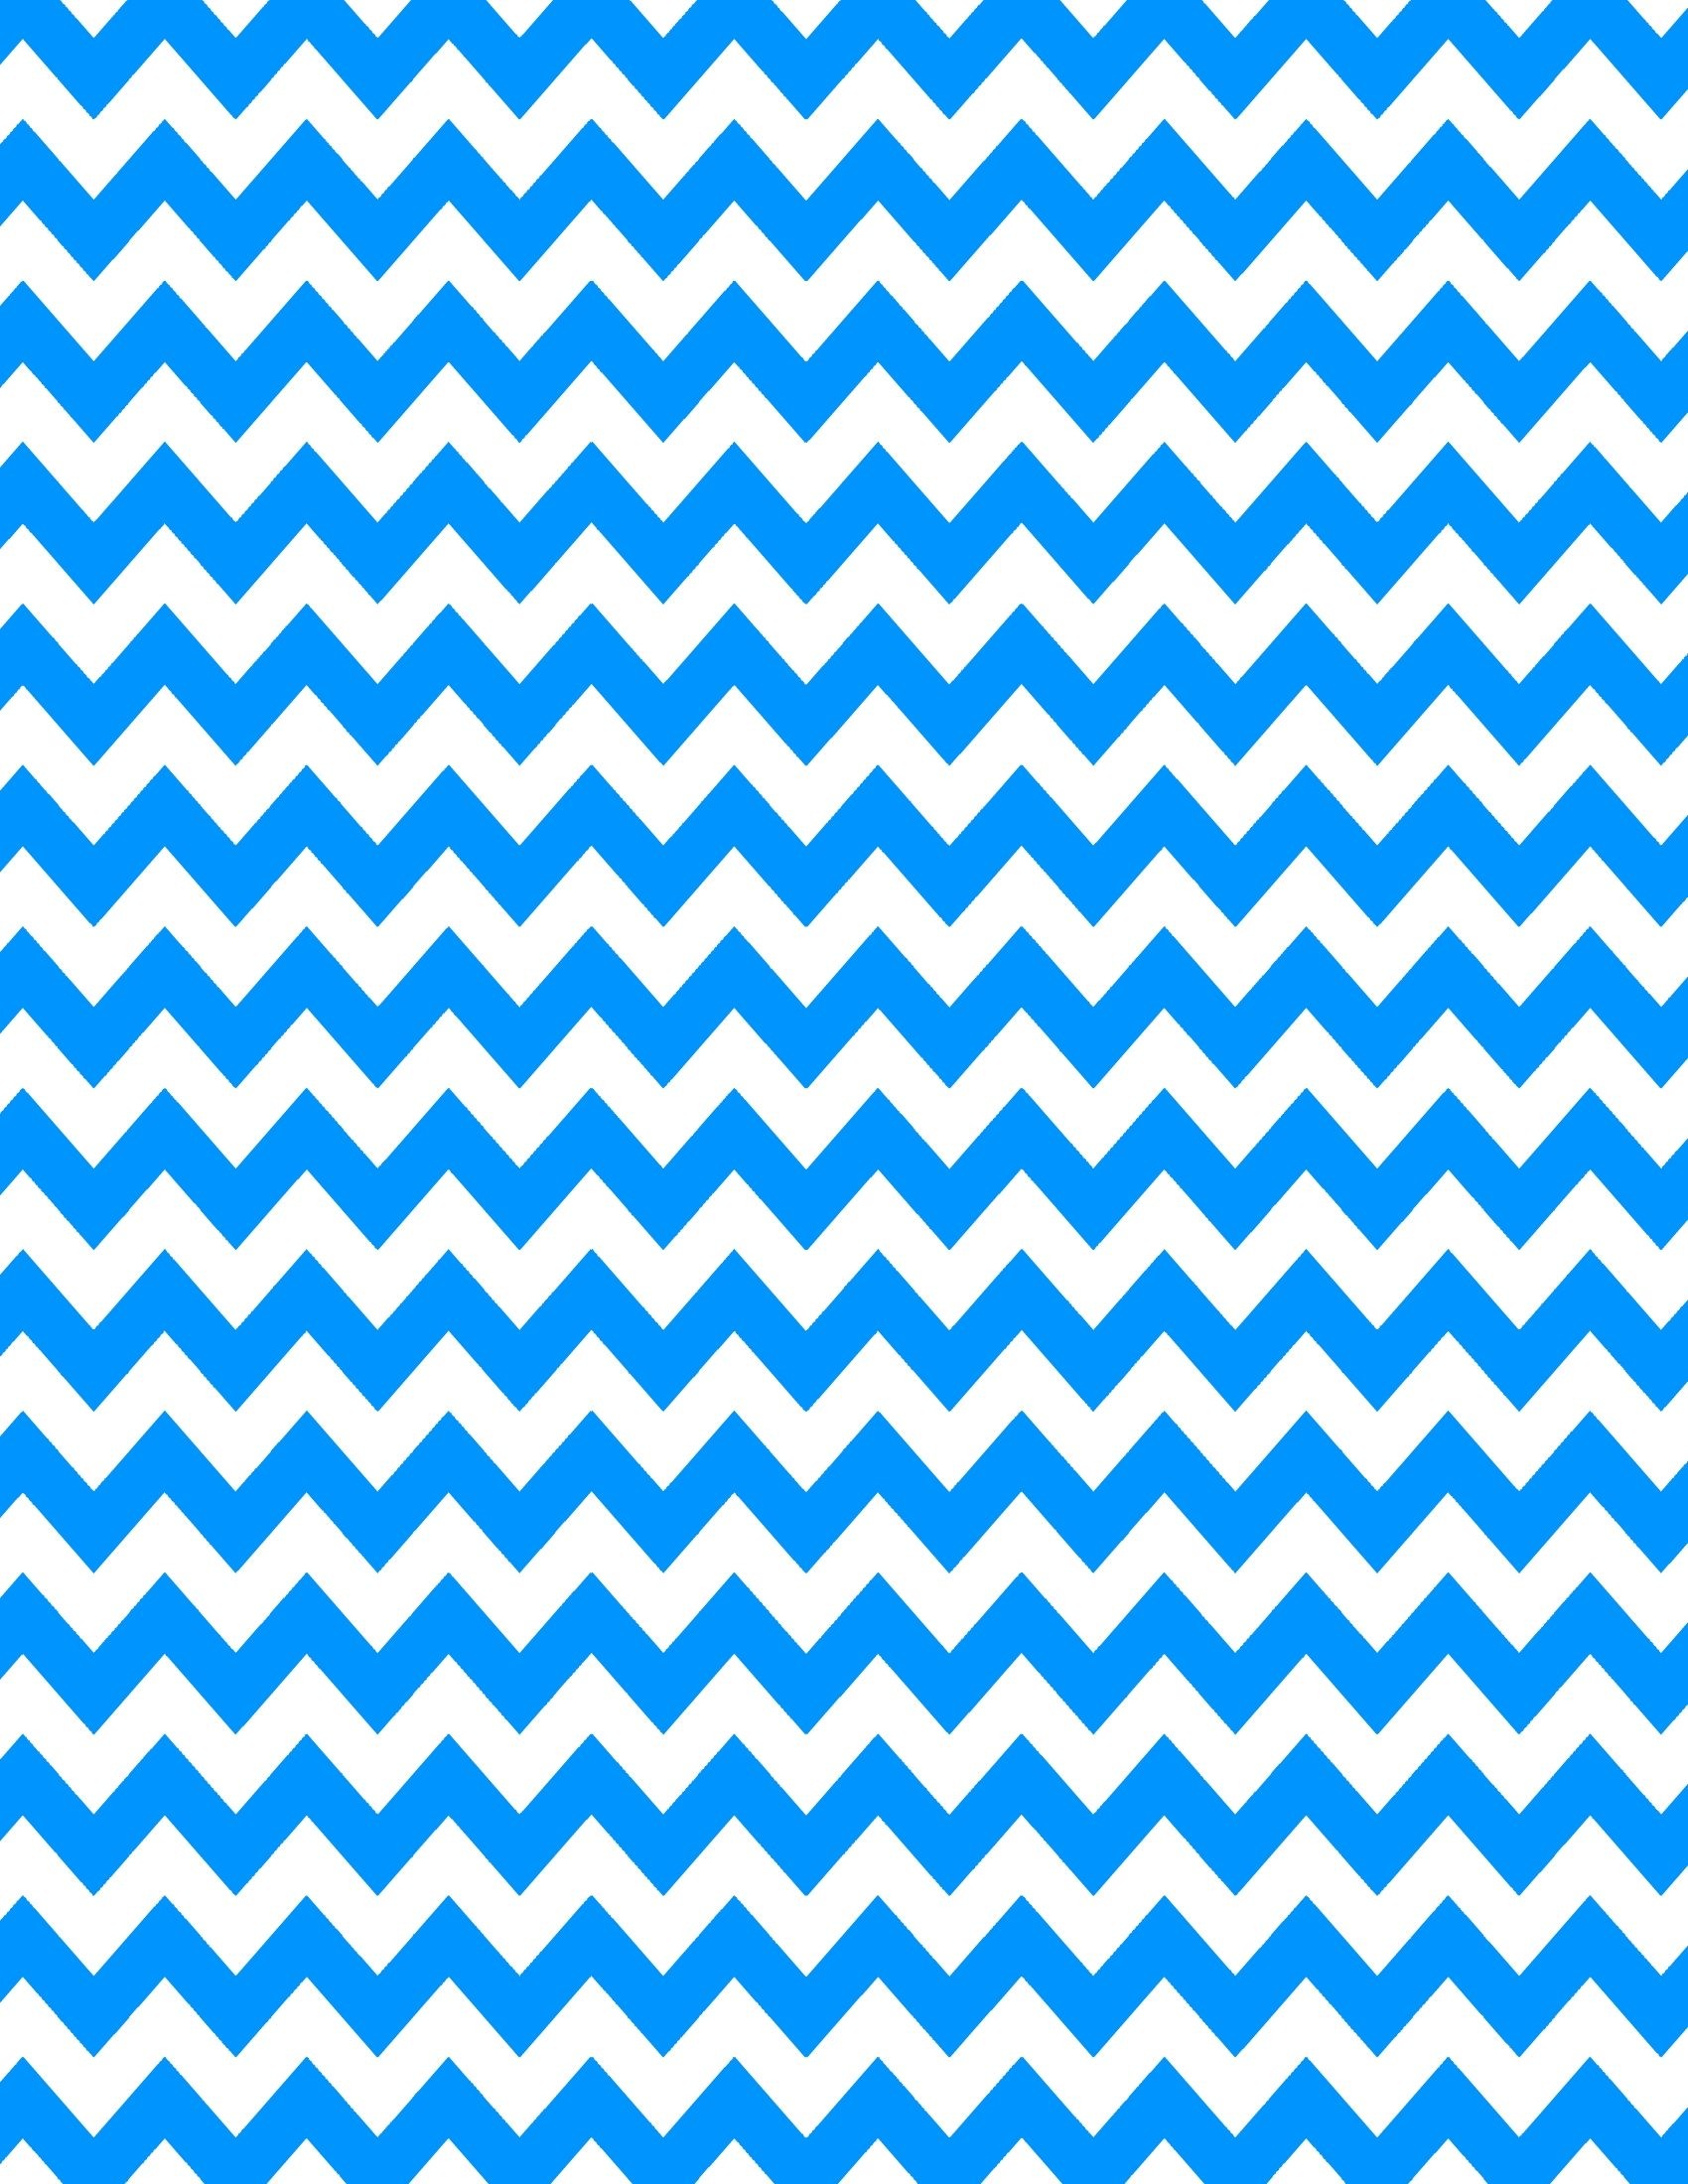 Chevron background ·① Download free awesome HD wallpapers for desktop